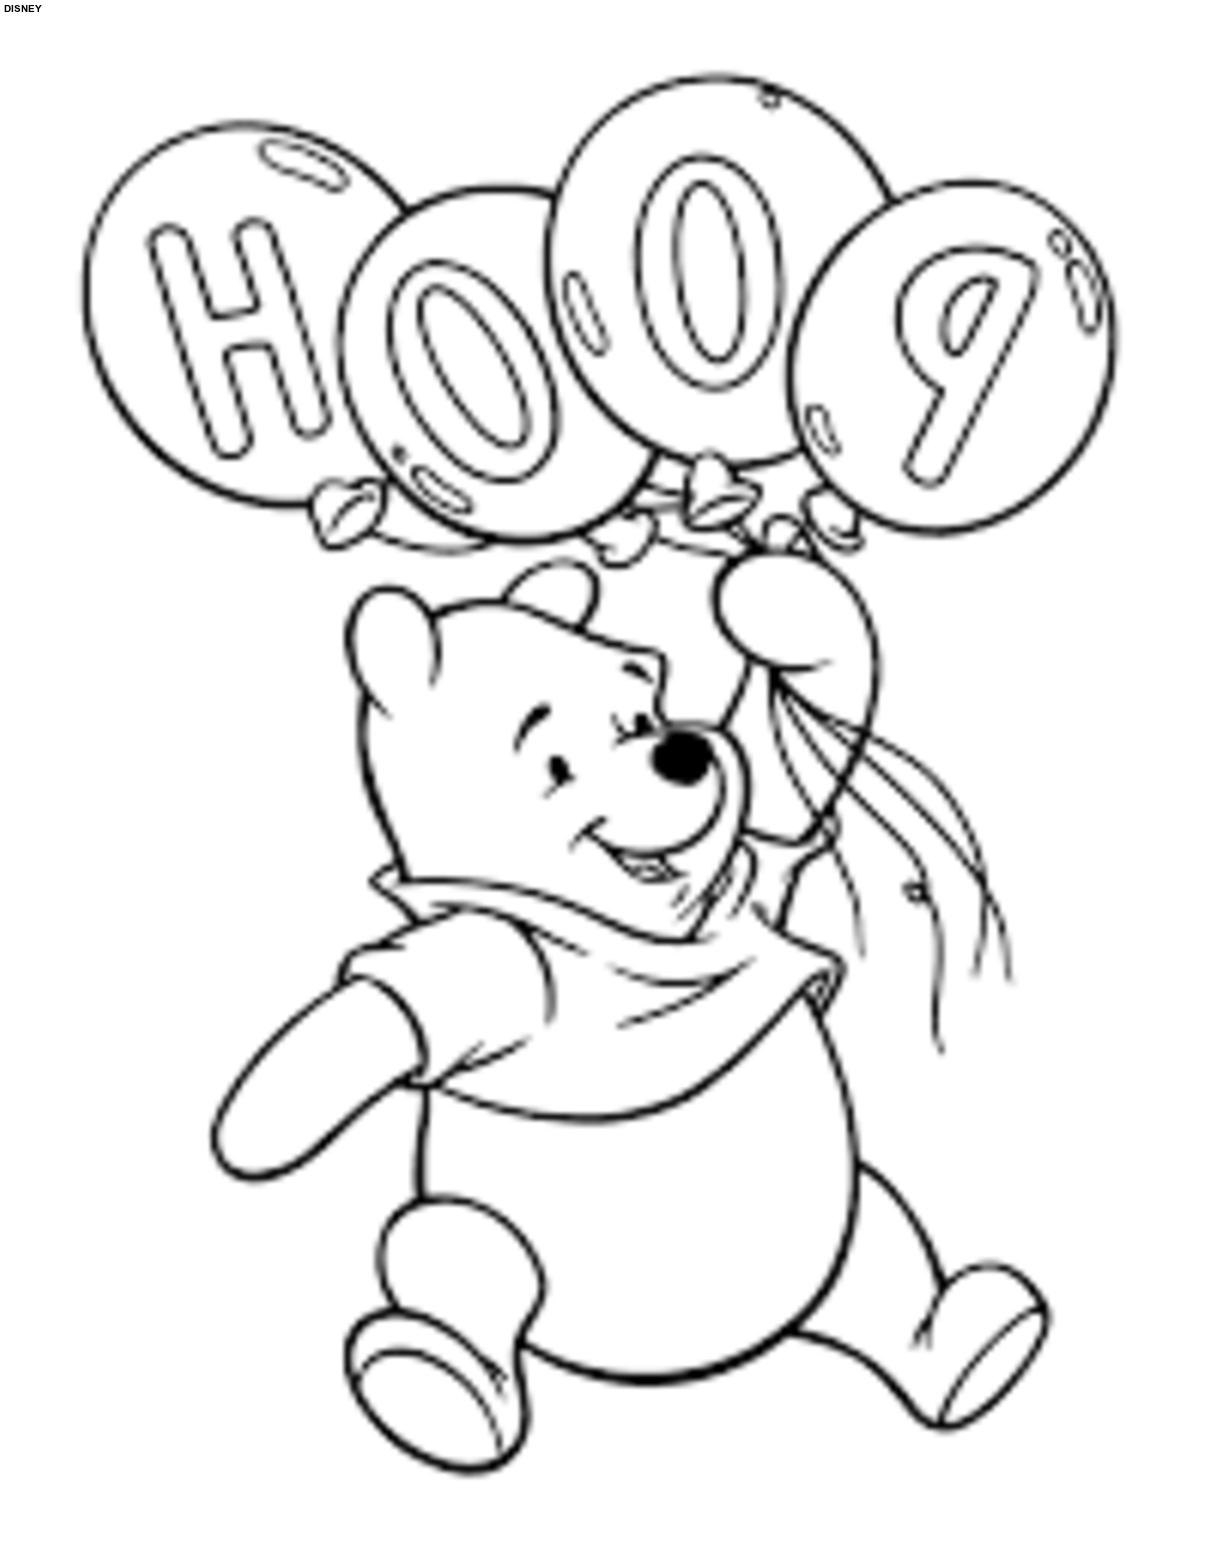 Disney Cartoon Characters Coloring Pages Christmas - Coloring Home